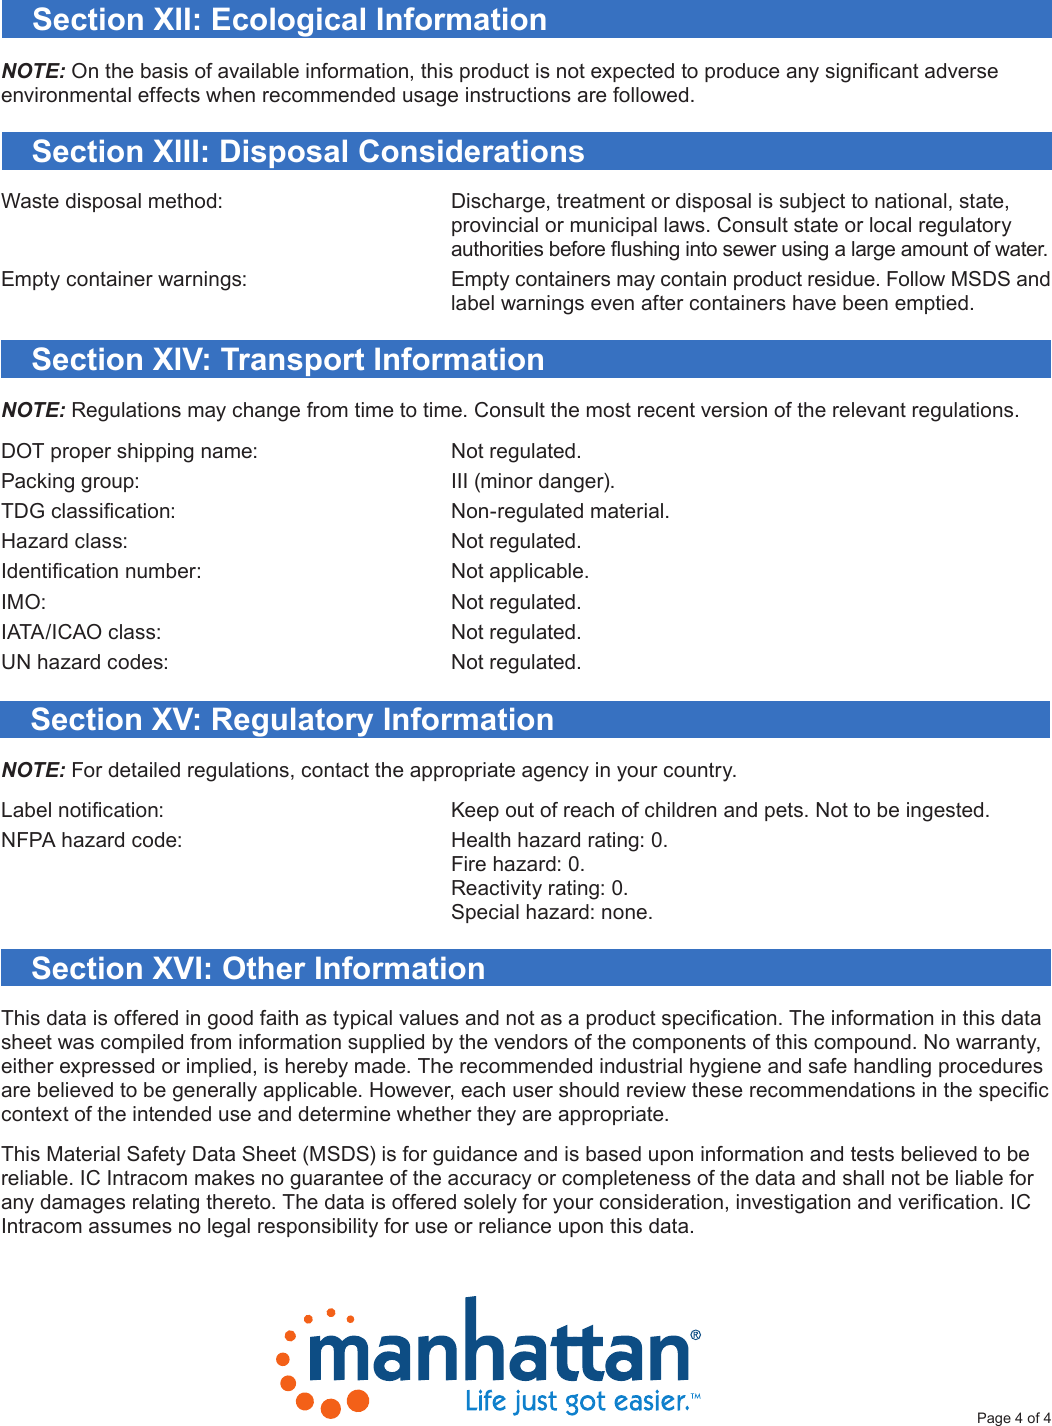 Page 4 of 4 - 421010 MSDS